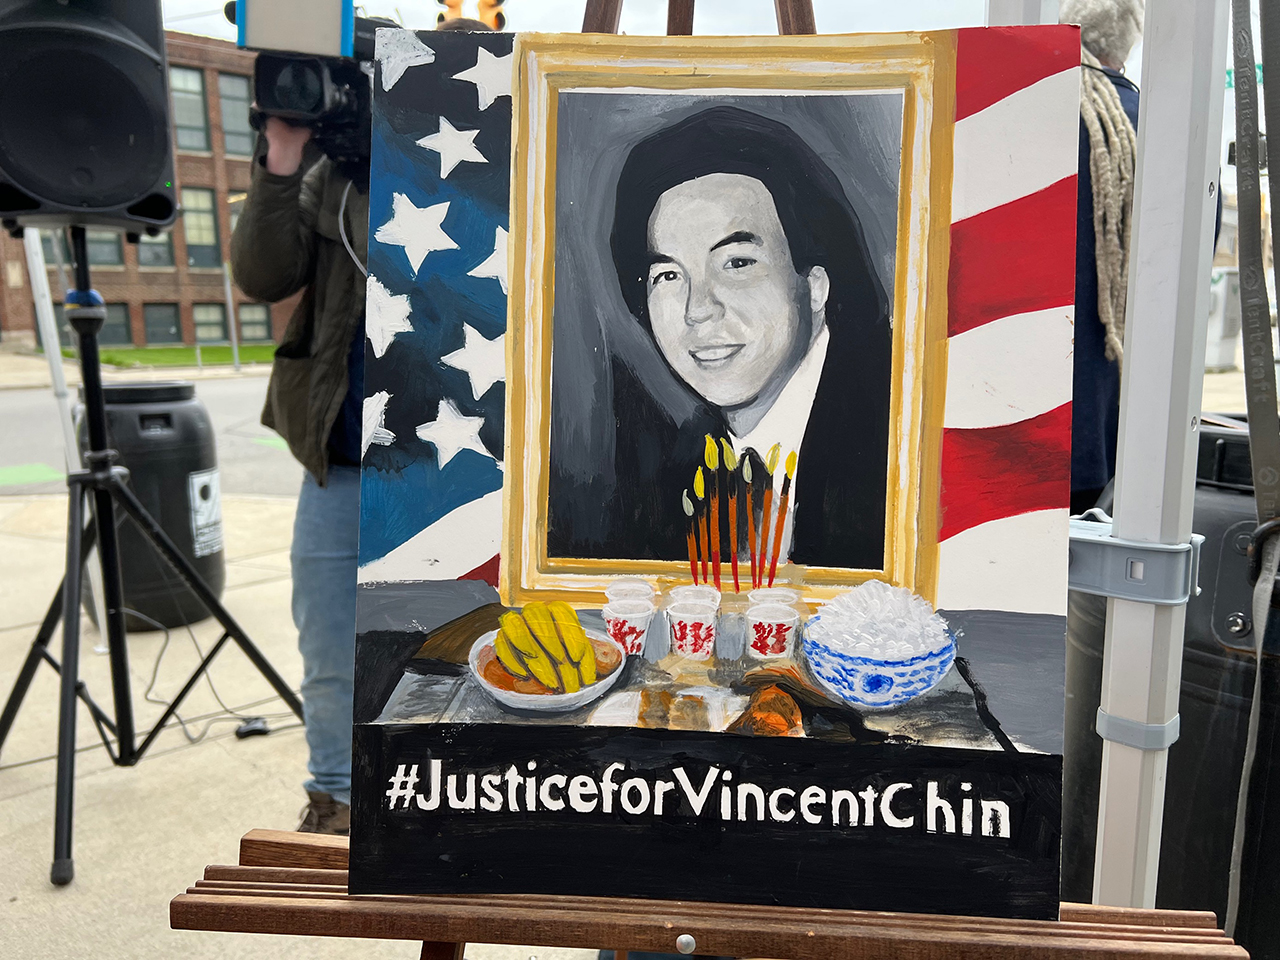 Events to reflect on Vincent Chin’s legacy » WDET 101.9 FM